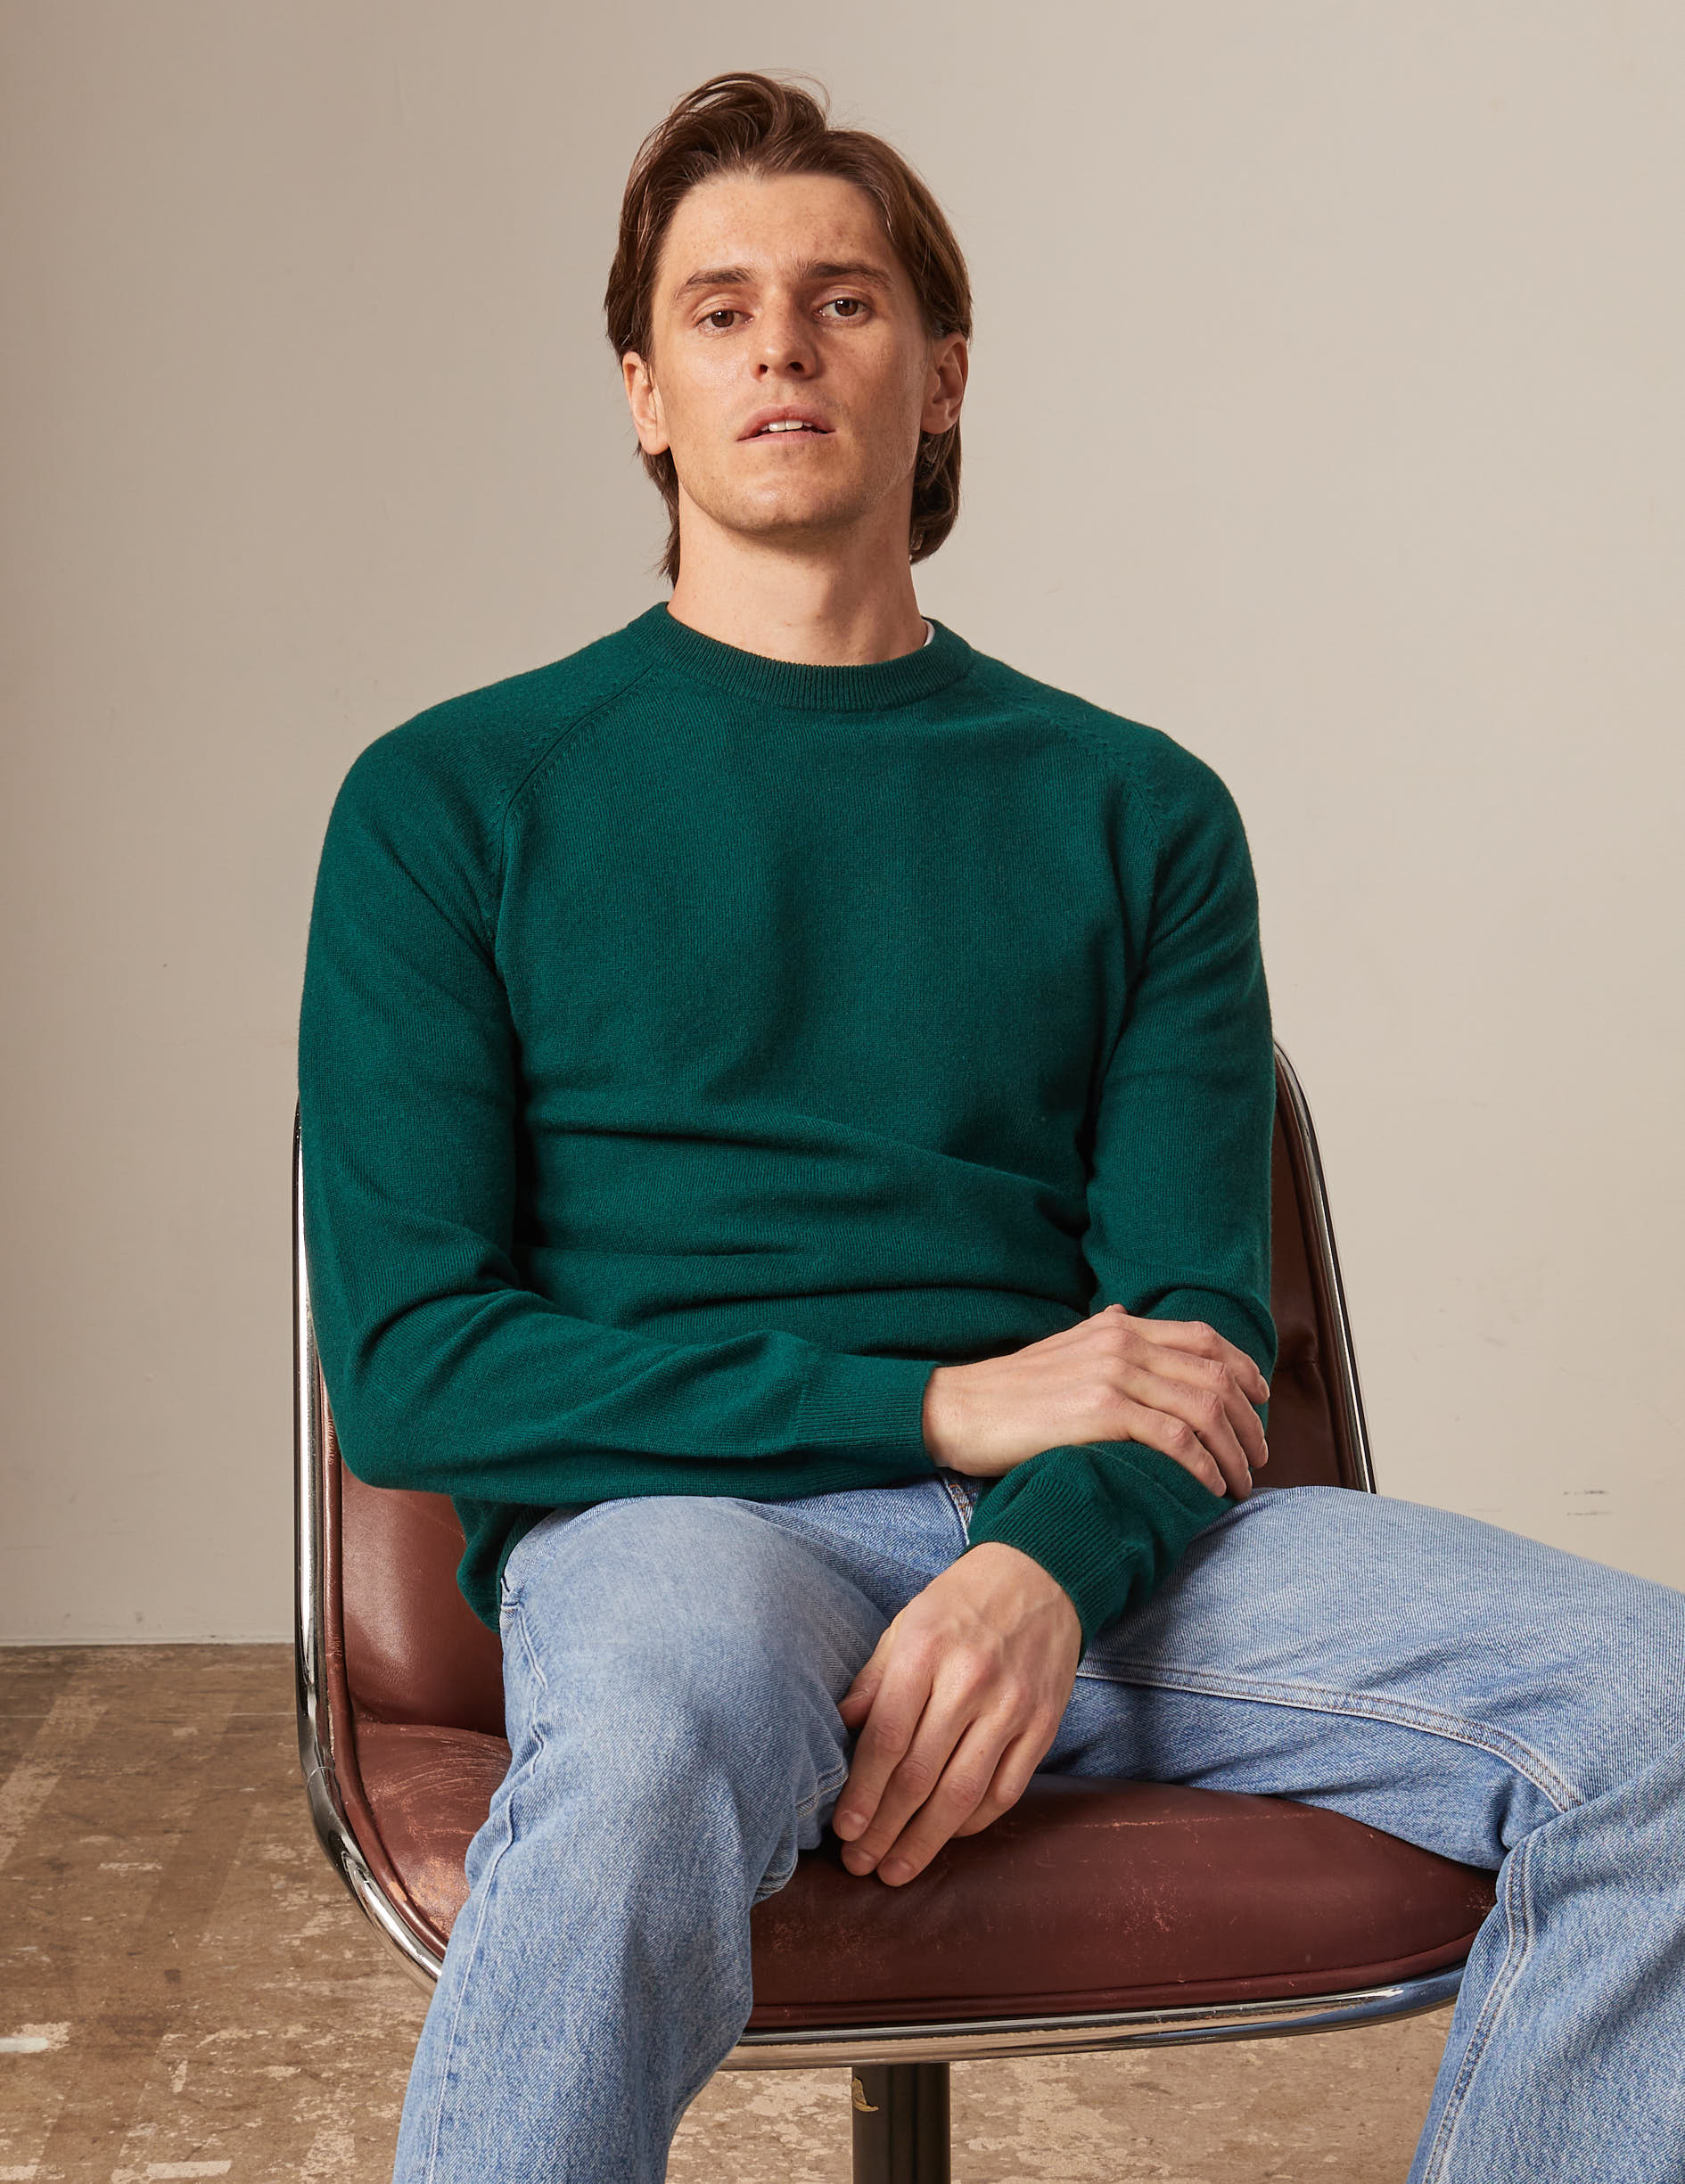 Green wool and cashmere Emile jumper